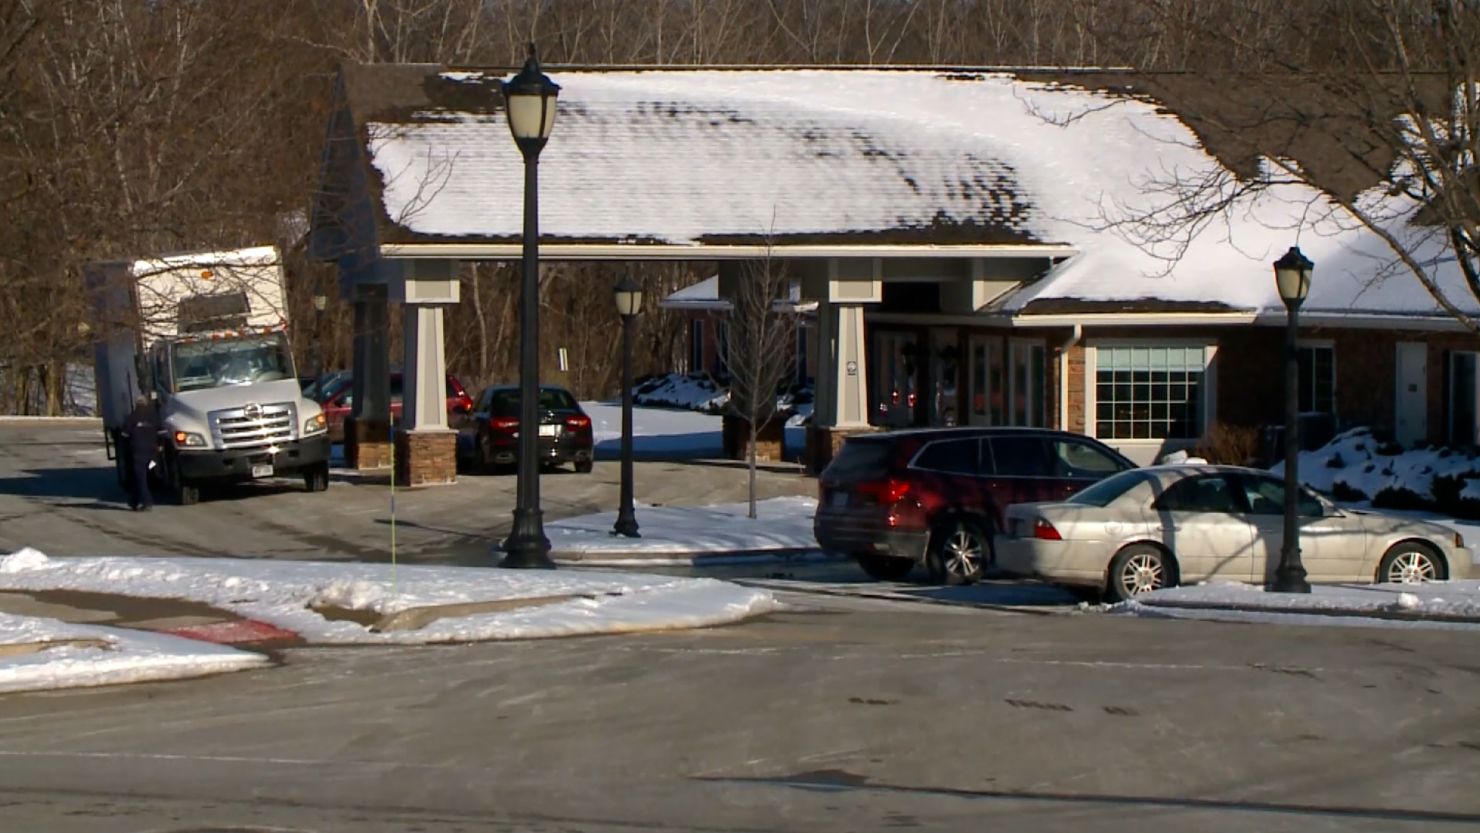 The Iowa Department of Inspections and Appeals issued a violation notice to an Alzheimer's care facility, seen here, after pronouncing a 66-year-old woman dead who was later found alive
